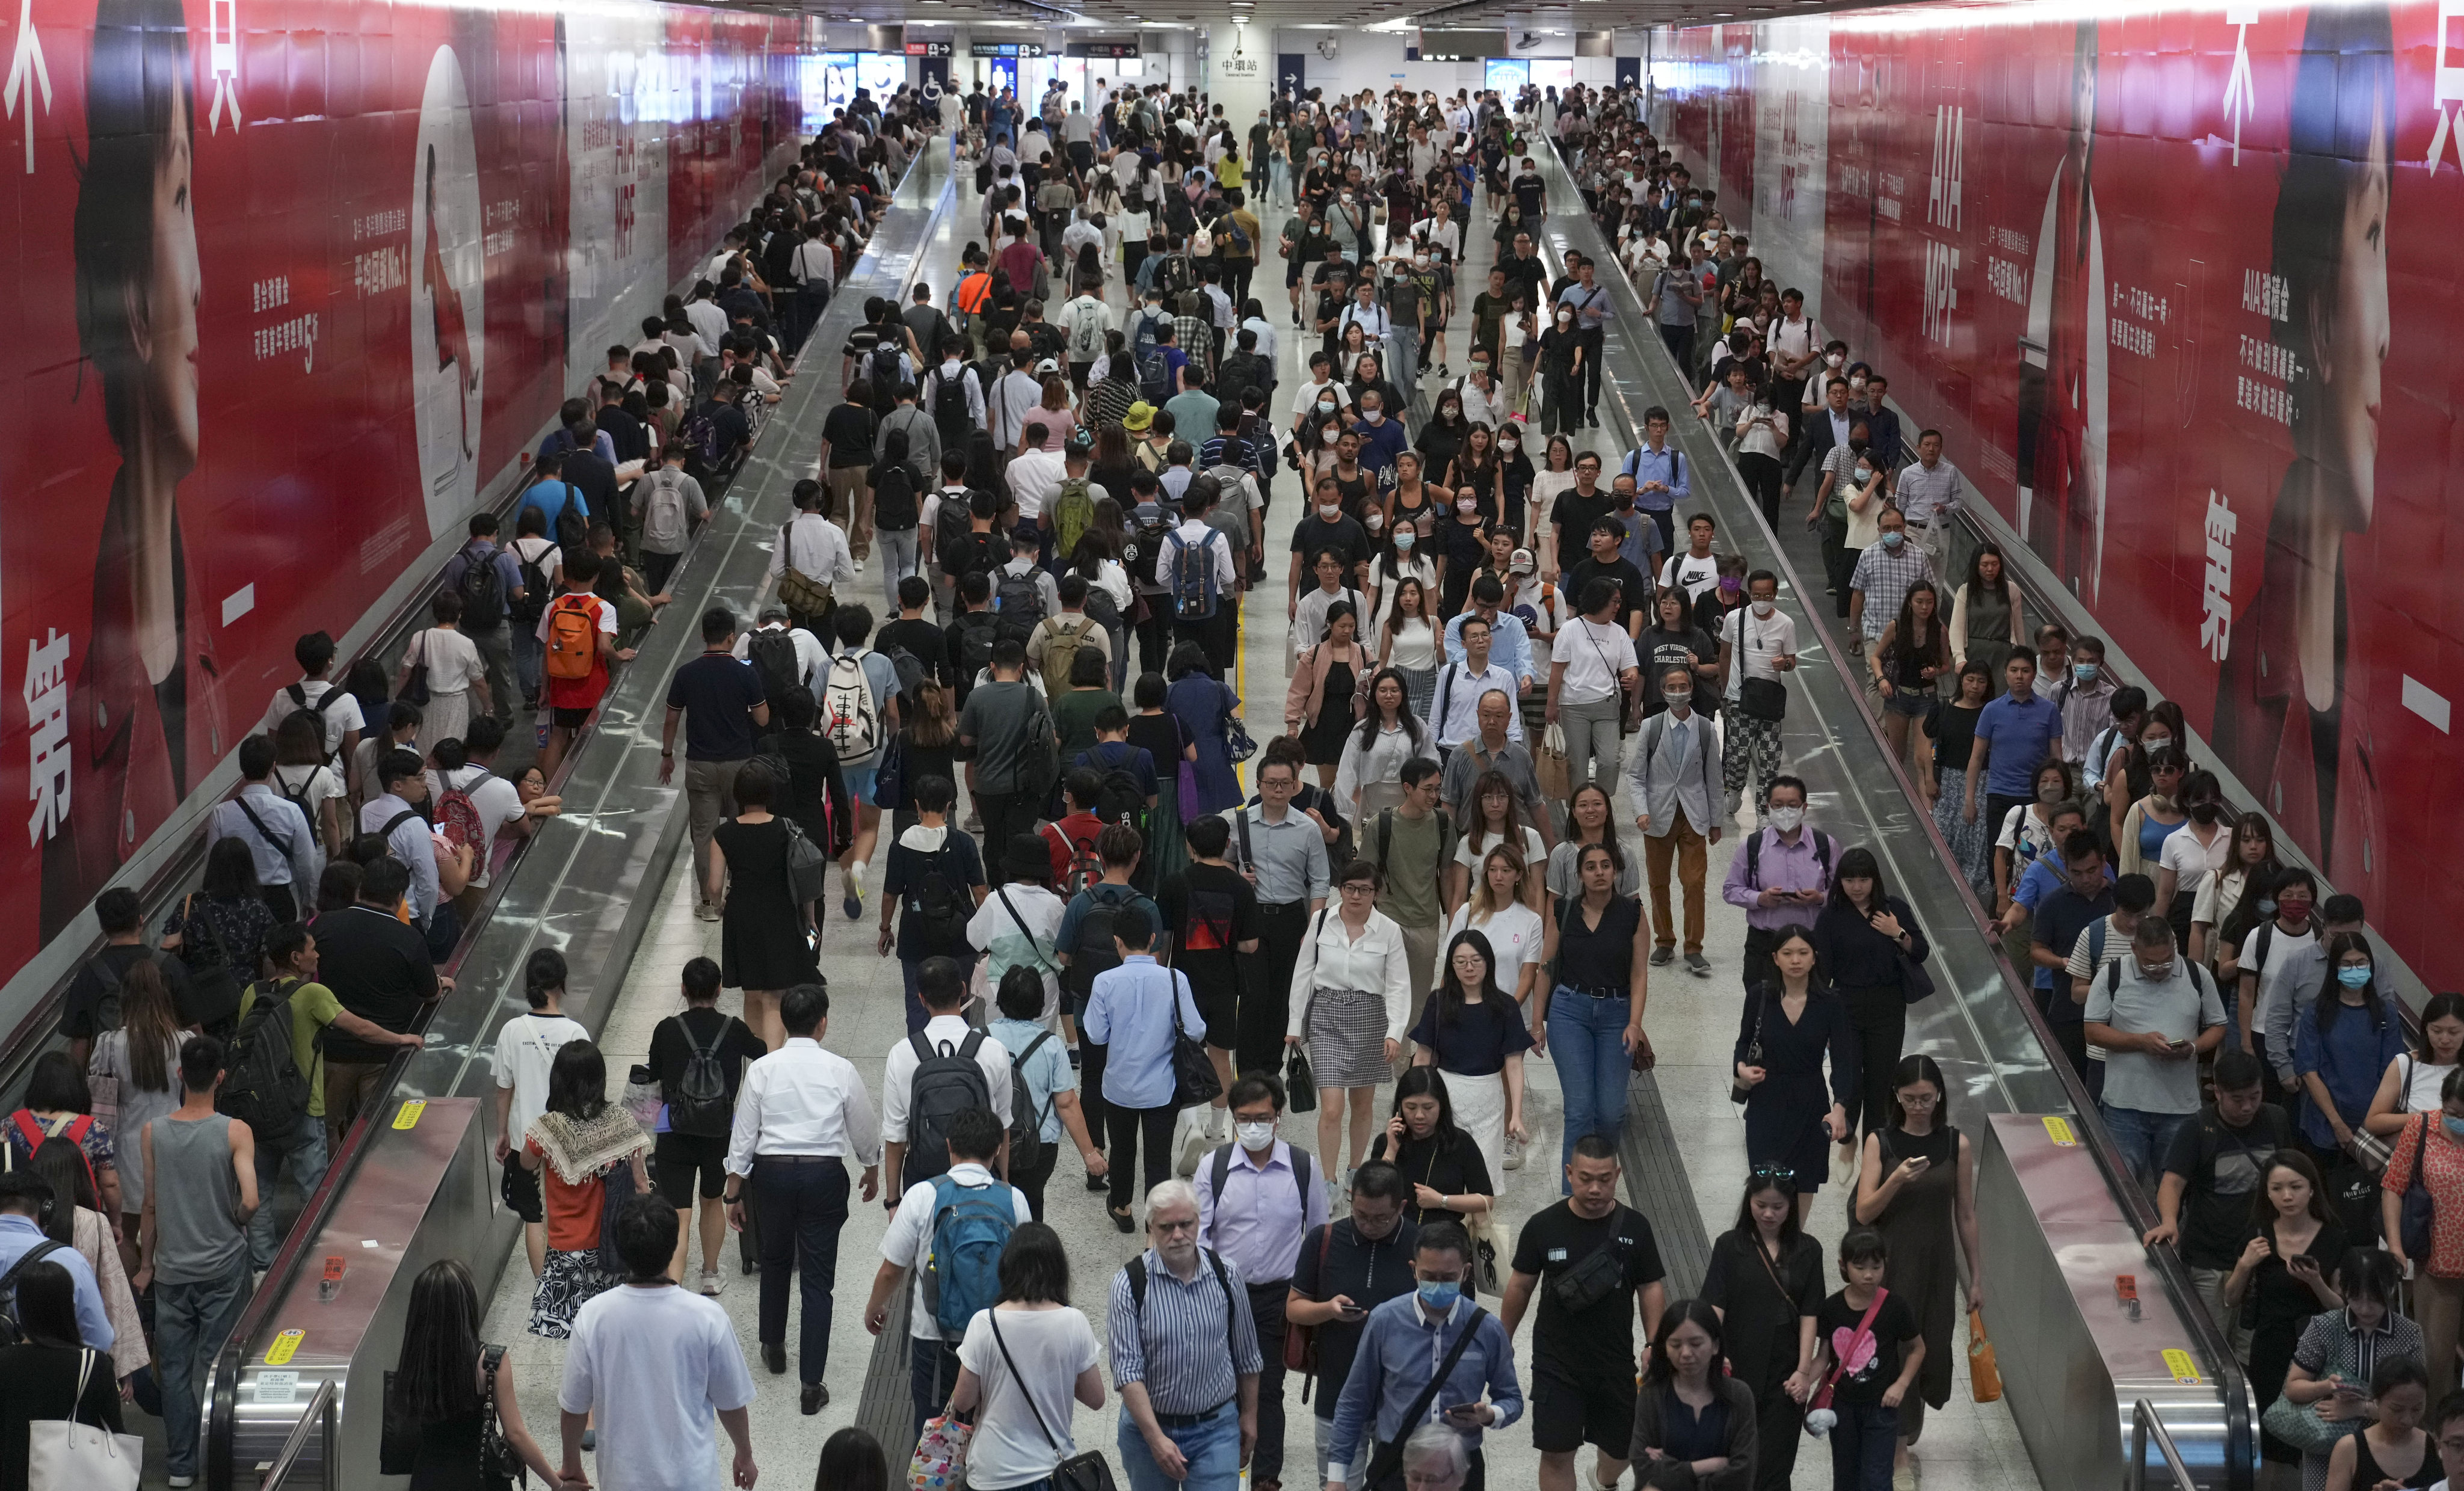 Rush hour at Central station. The MTR Corp introduced its early bird discount to encourage passengers to complete their train trips before peak hours. Photo: Sam Tsang